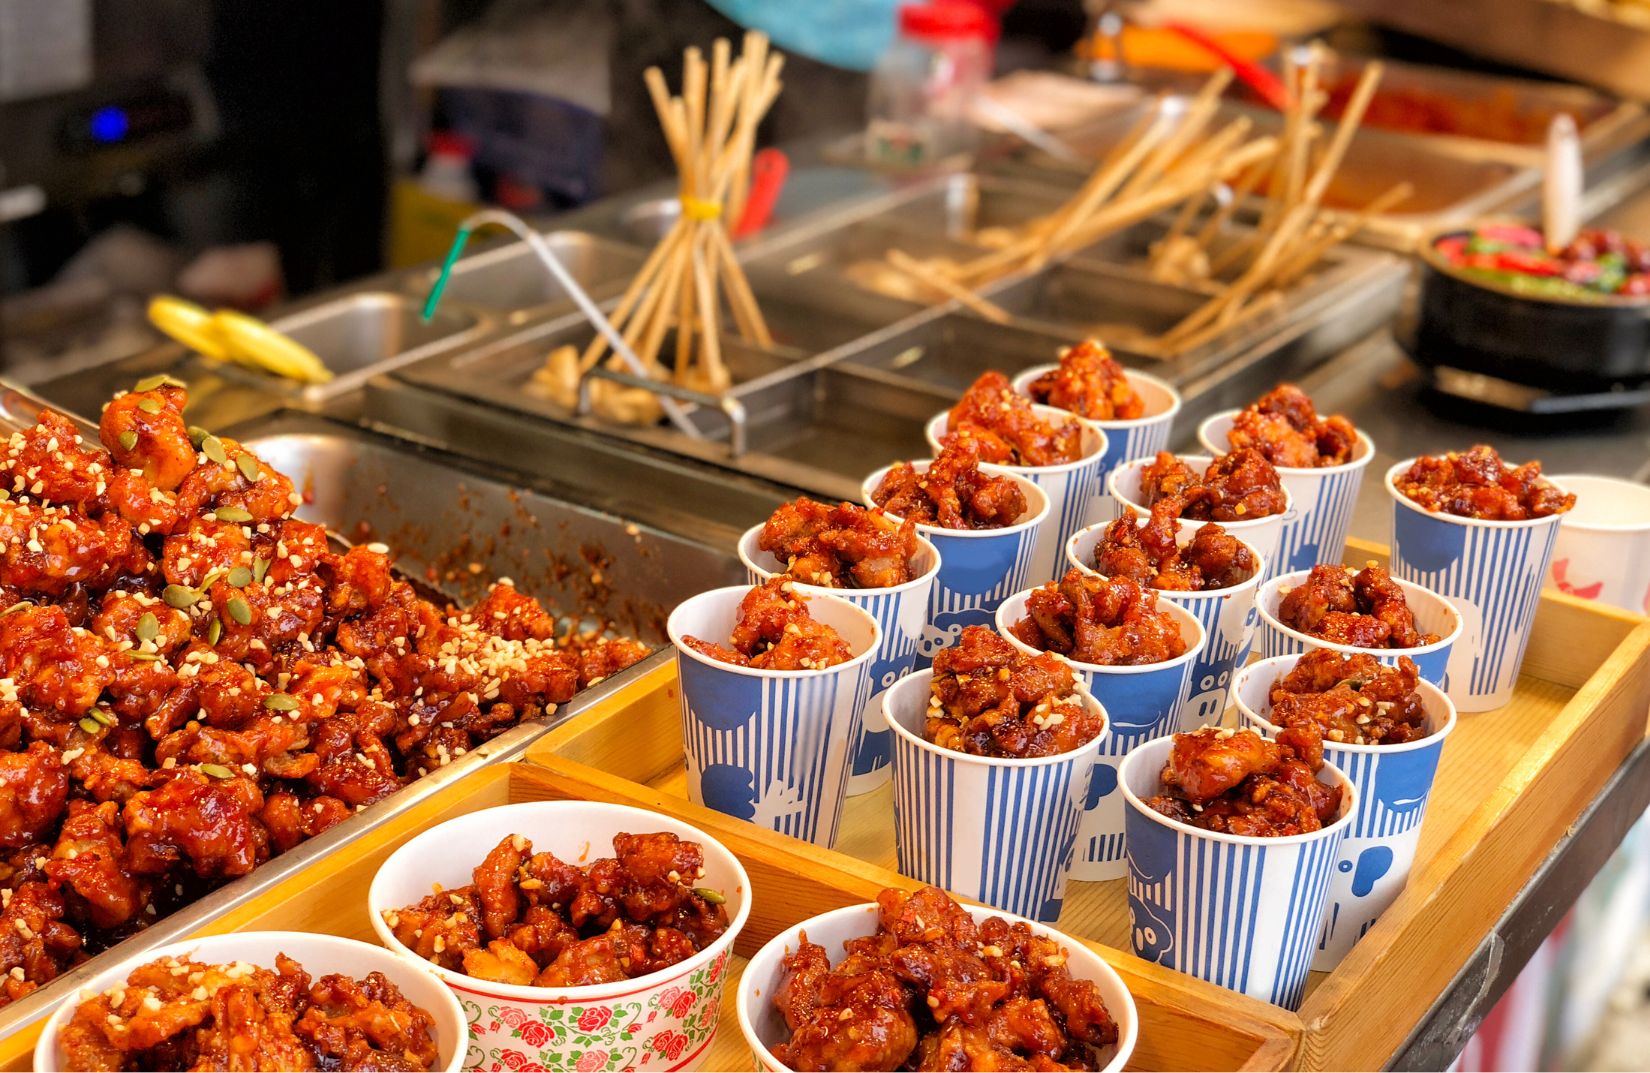 Delhi To Get Its First Night Food Street! Now, You Can Relish Yummy Street Food Even At Midnight